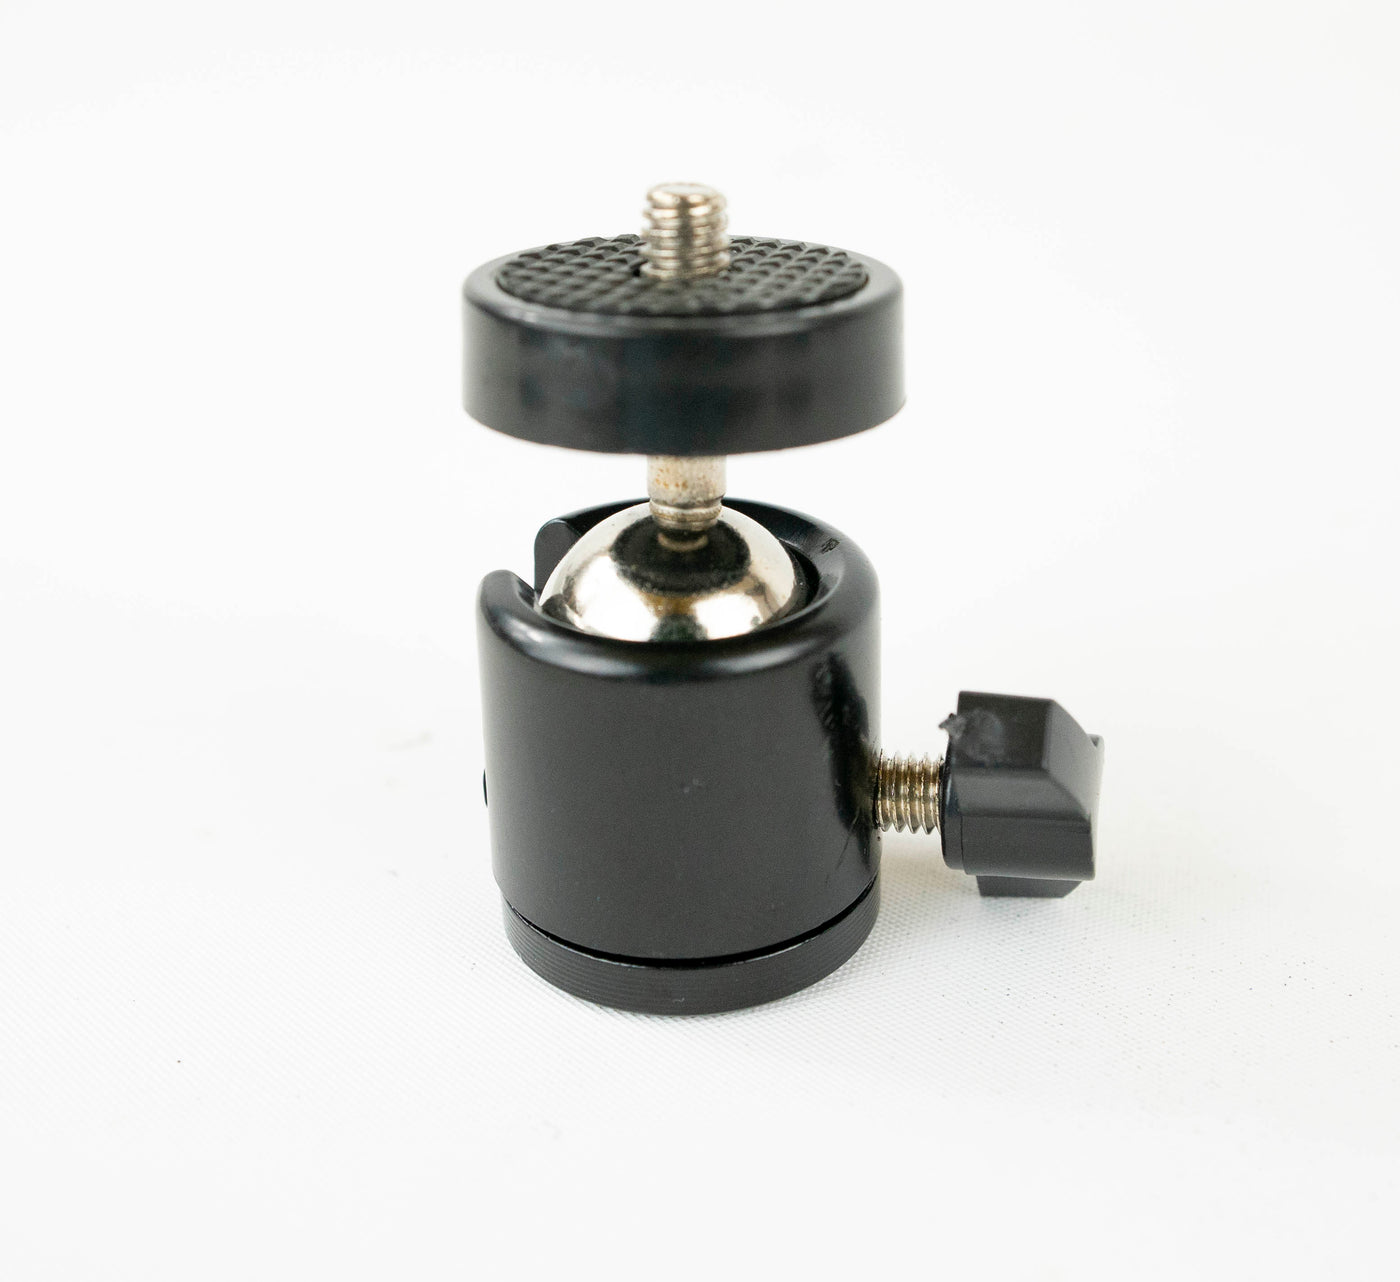 Attachment Kit - Basic - Small Cams